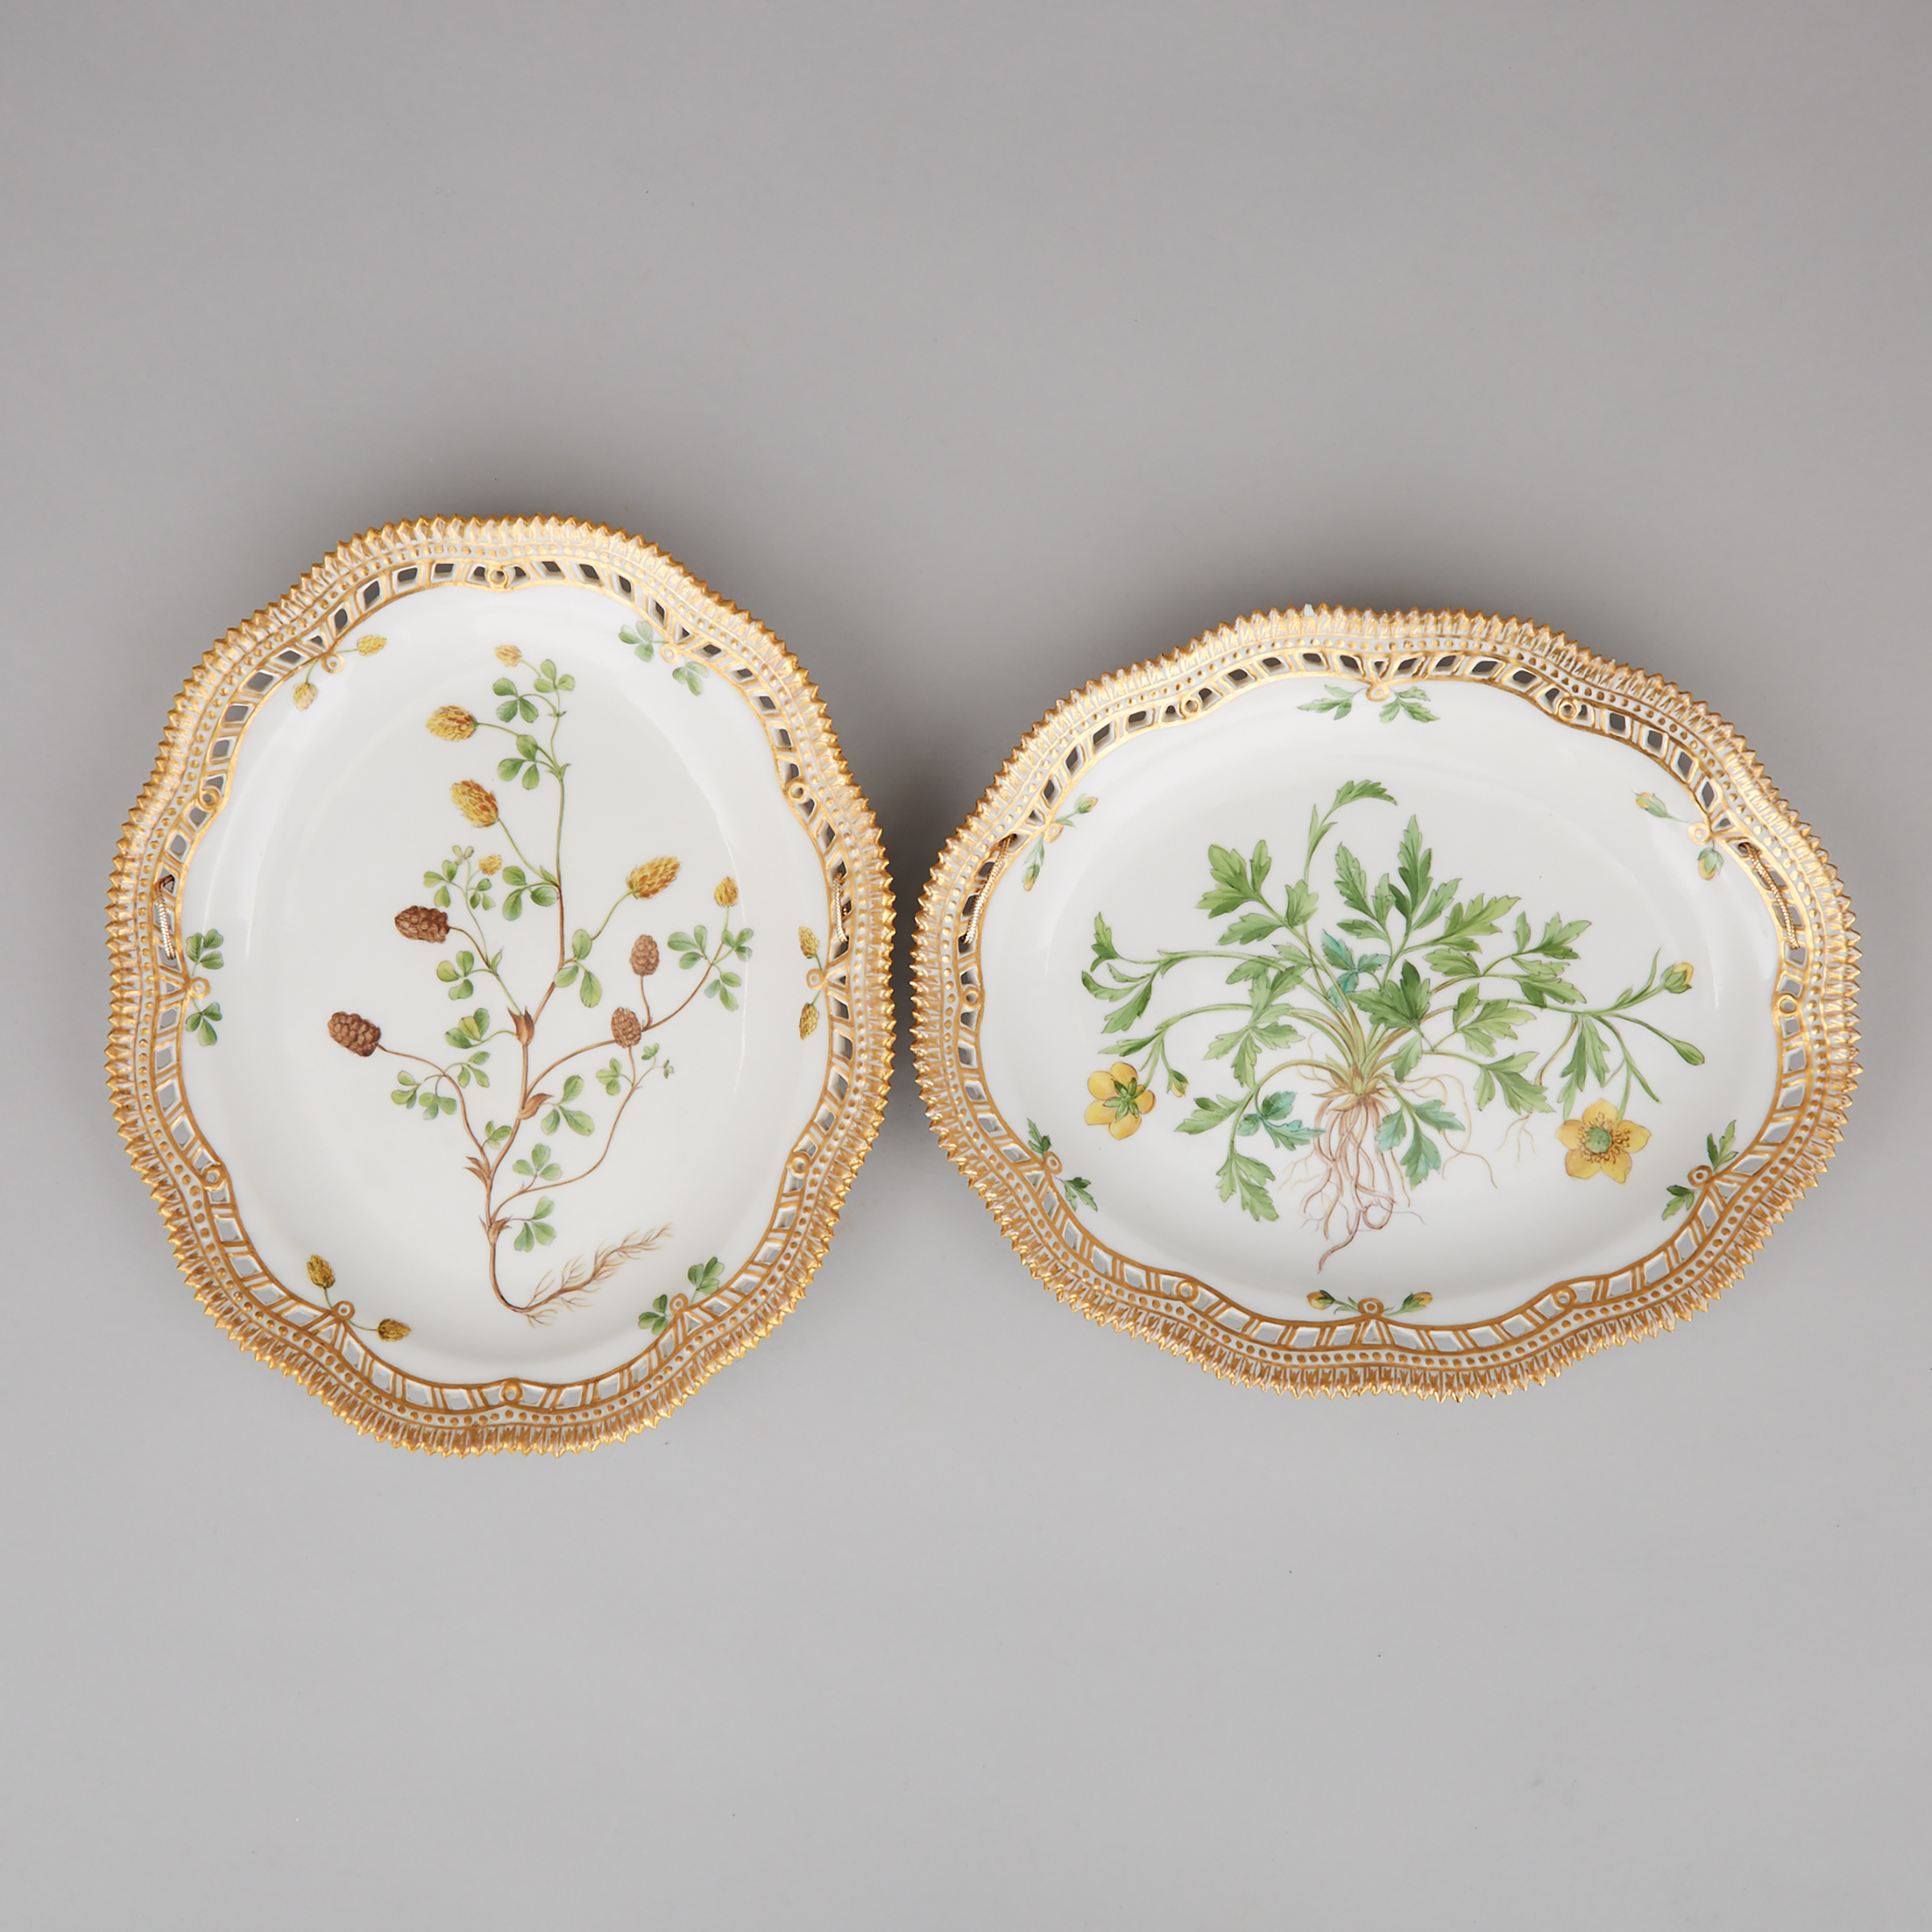 Pair of Royal Copenhagen ‘Flora Danica’ Reticulated Oval Dishes, 20th century